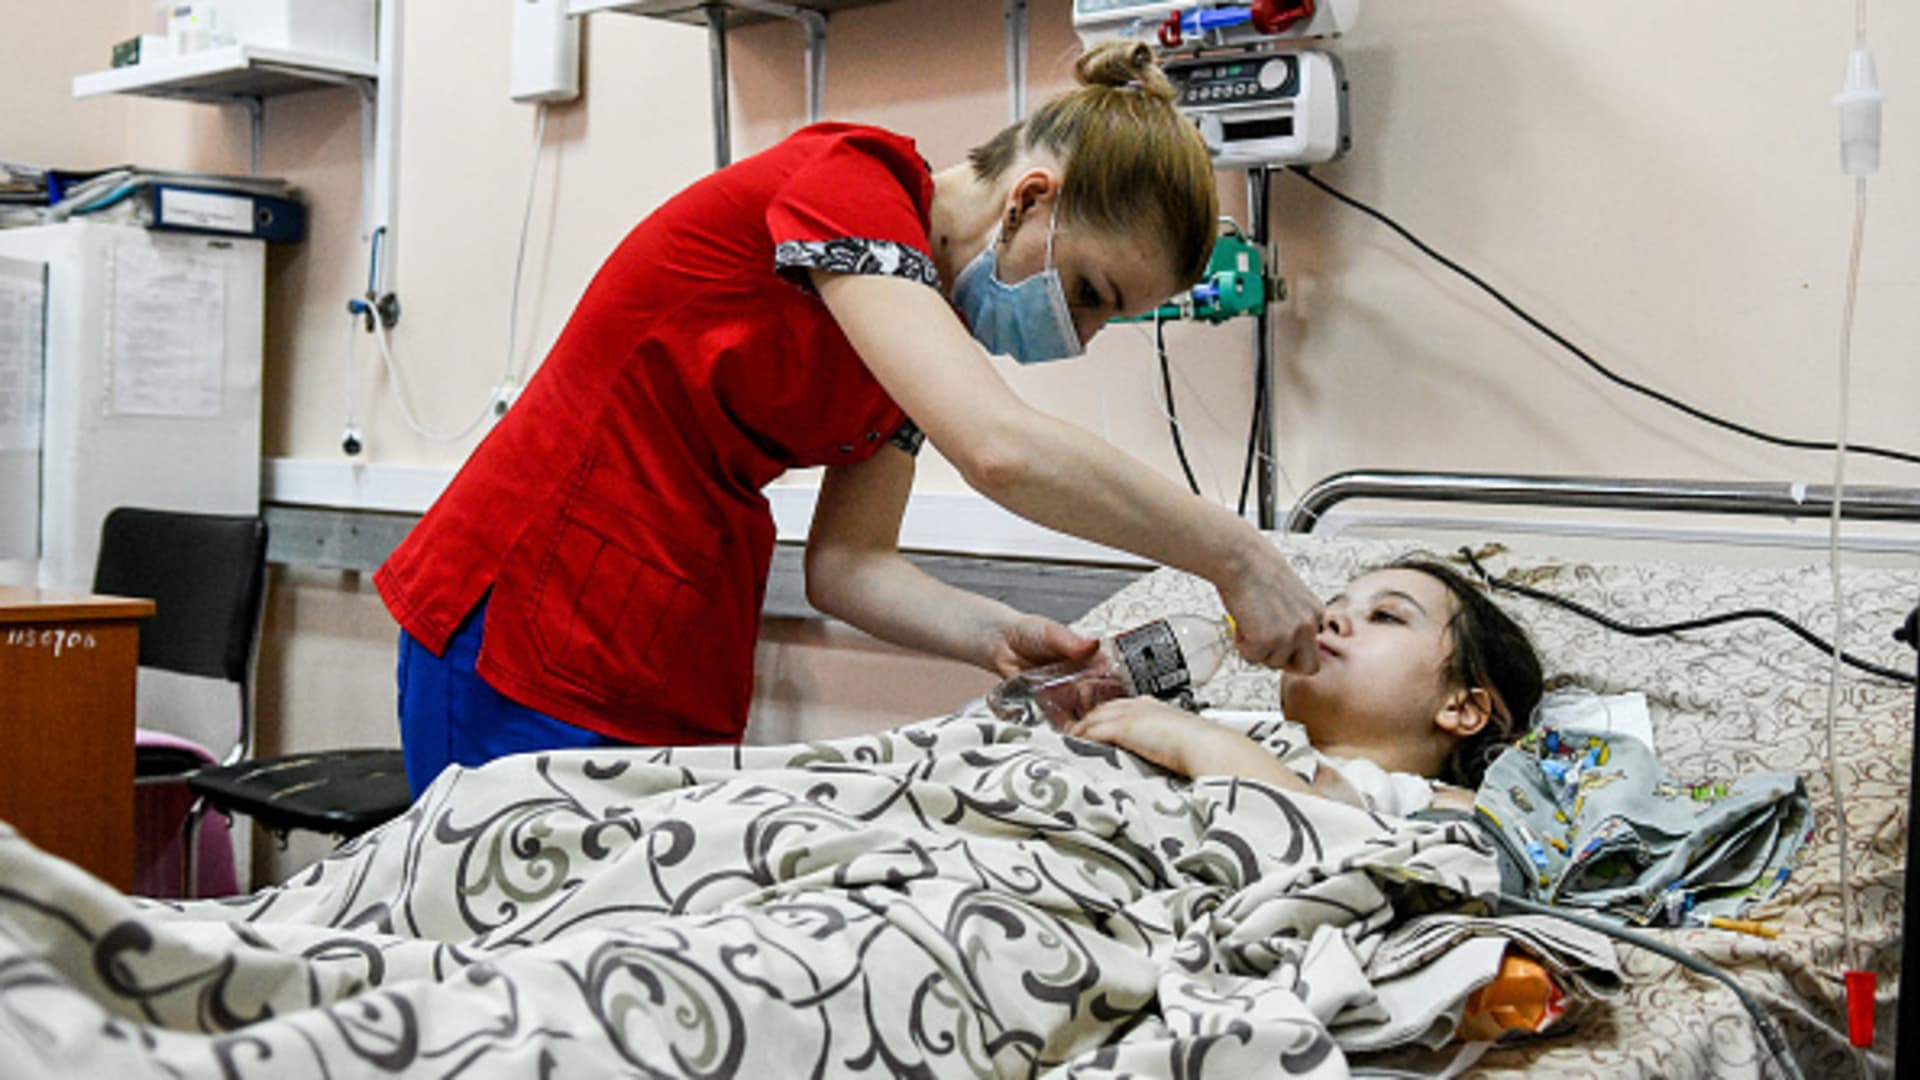 Injured civilians from Mariupol, receive treatment in Zaporizhzhia, Ukraine on March 18, 2022 as evacuations from Mariupol continue amid Russian attacks.